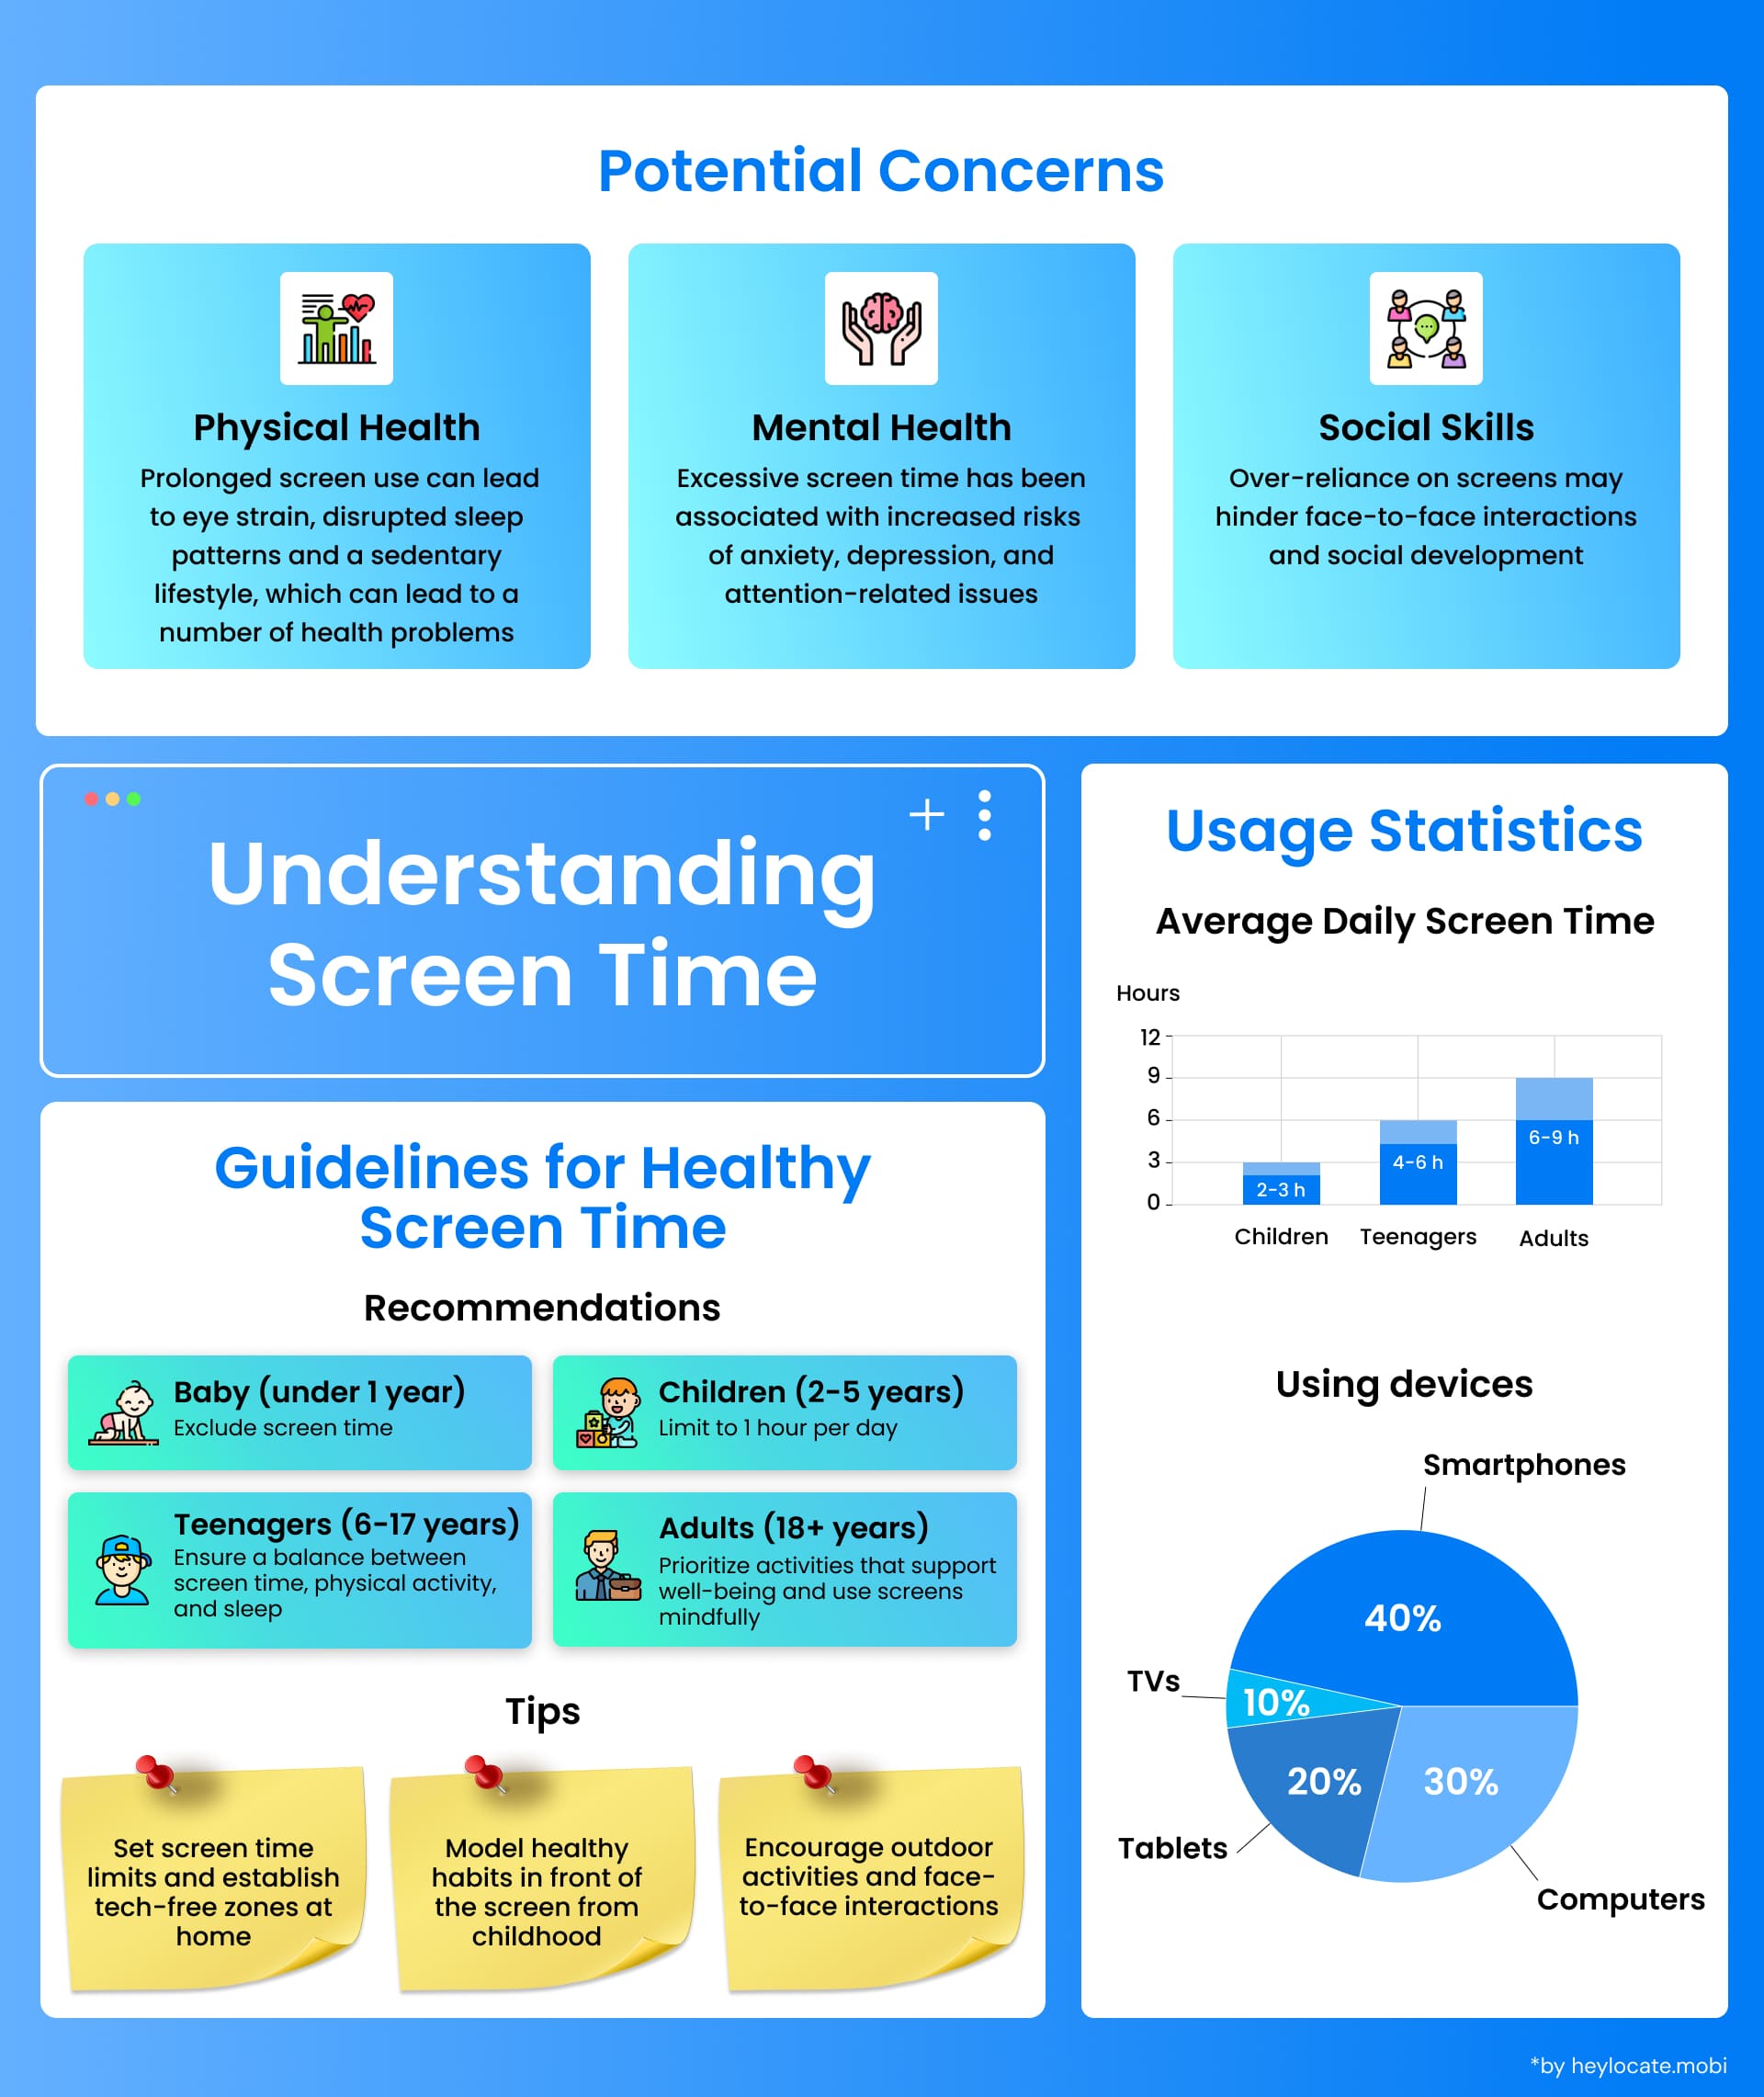 Infographic detailing the effects of screen time on physical and mental health, social skills, and providing guidelines for healthy usage across different age groups